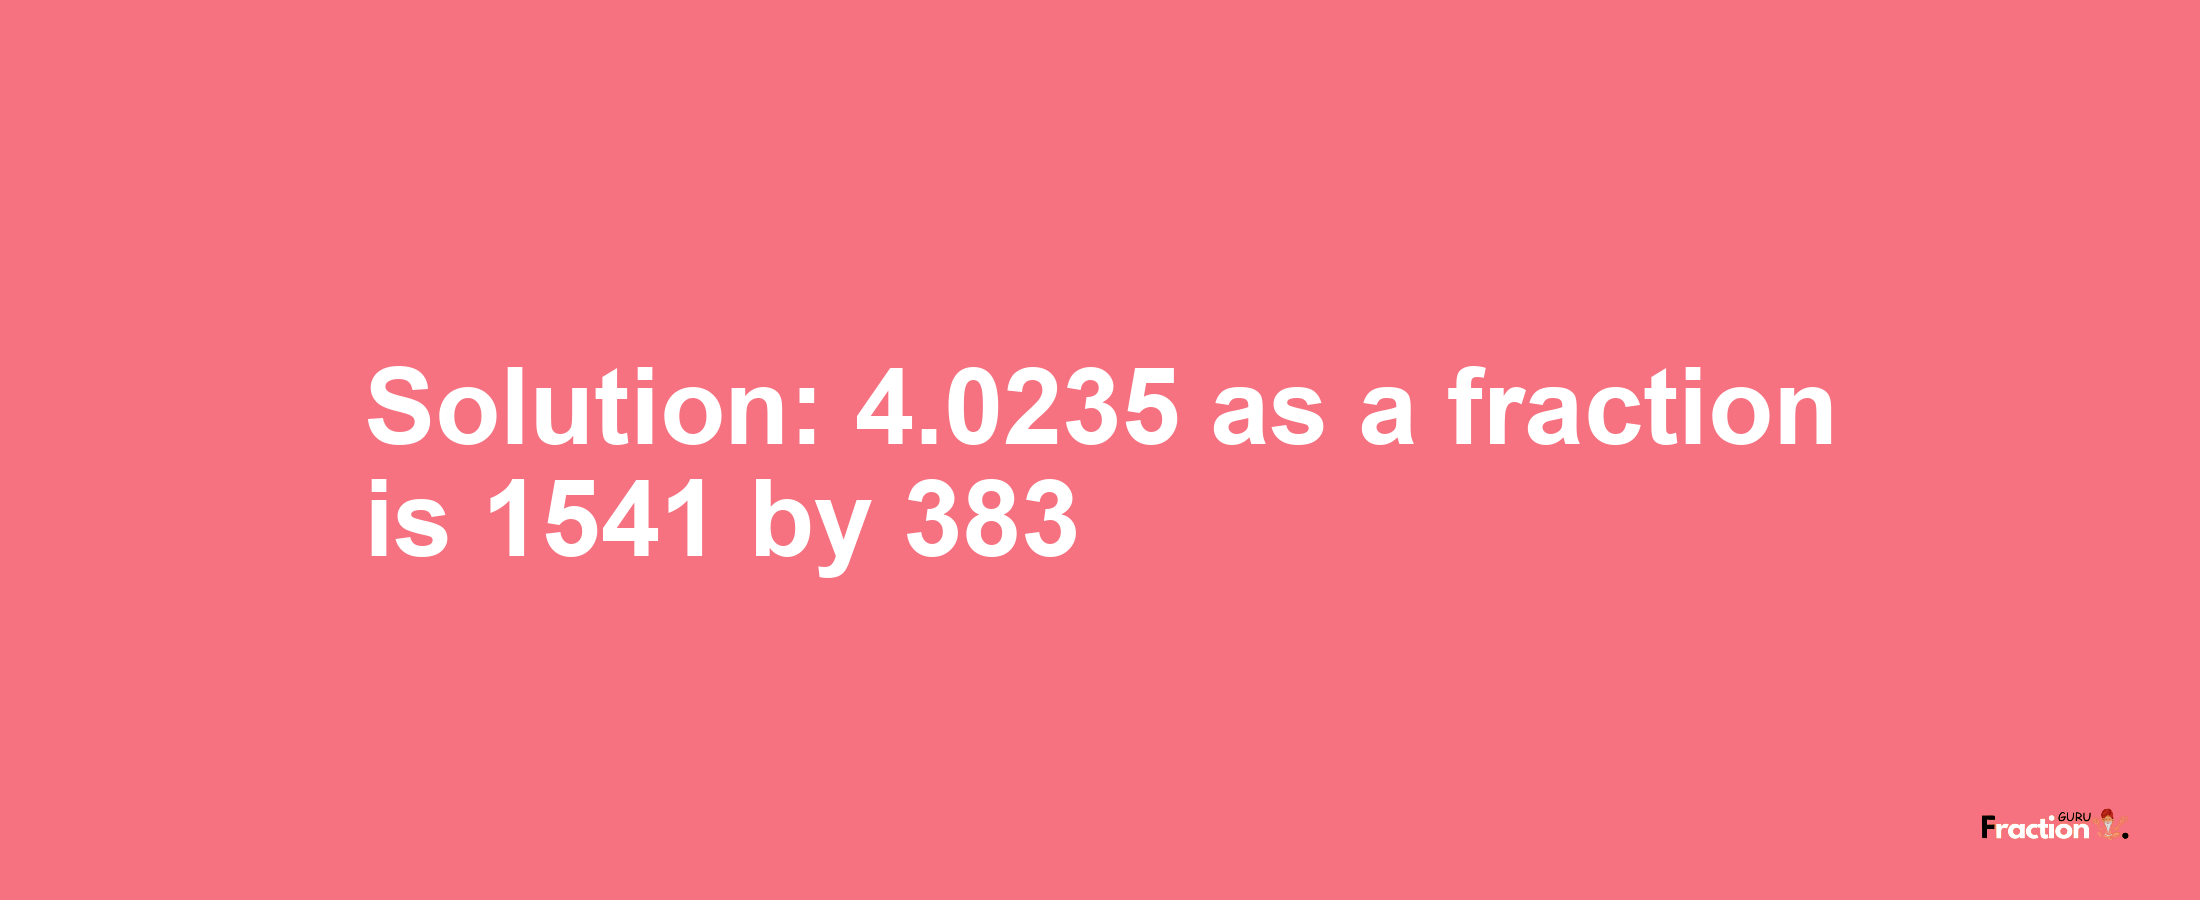 Solution:4.0235 as a fraction is 1541/383